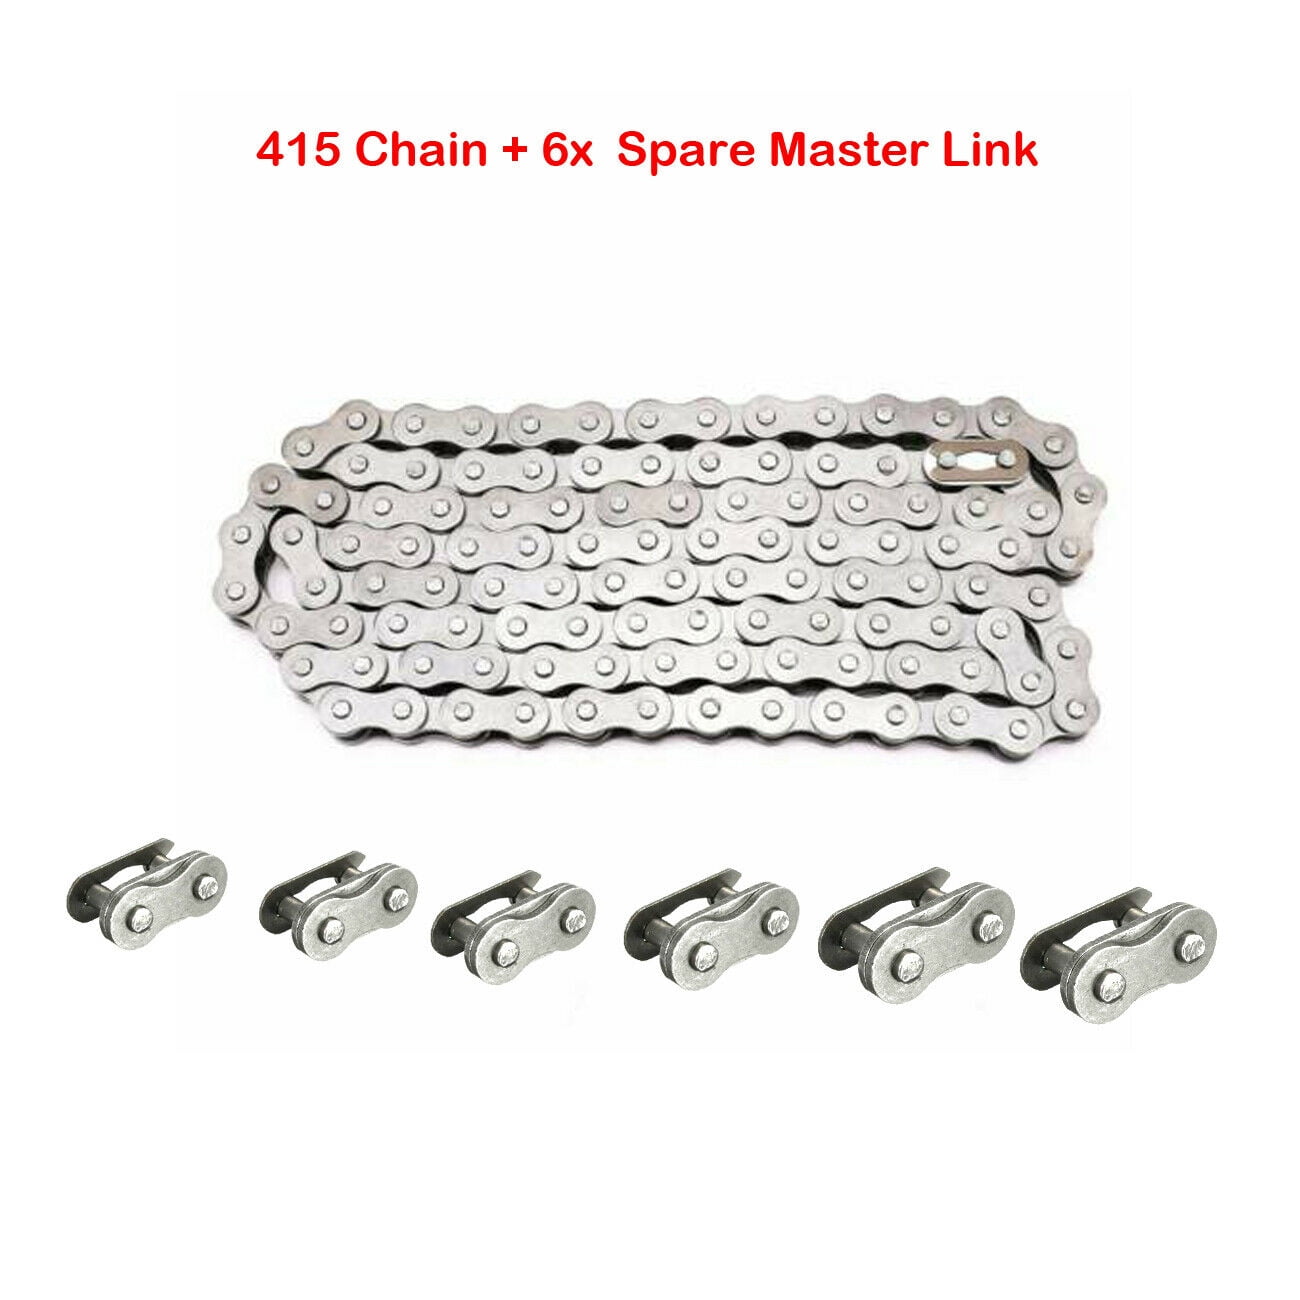 HIAORS 1pcs 415H Chain Master Link for 49cc 66cc 80cc 2-Cycle Motorized Bicycle Bike Gas Engine Parts 